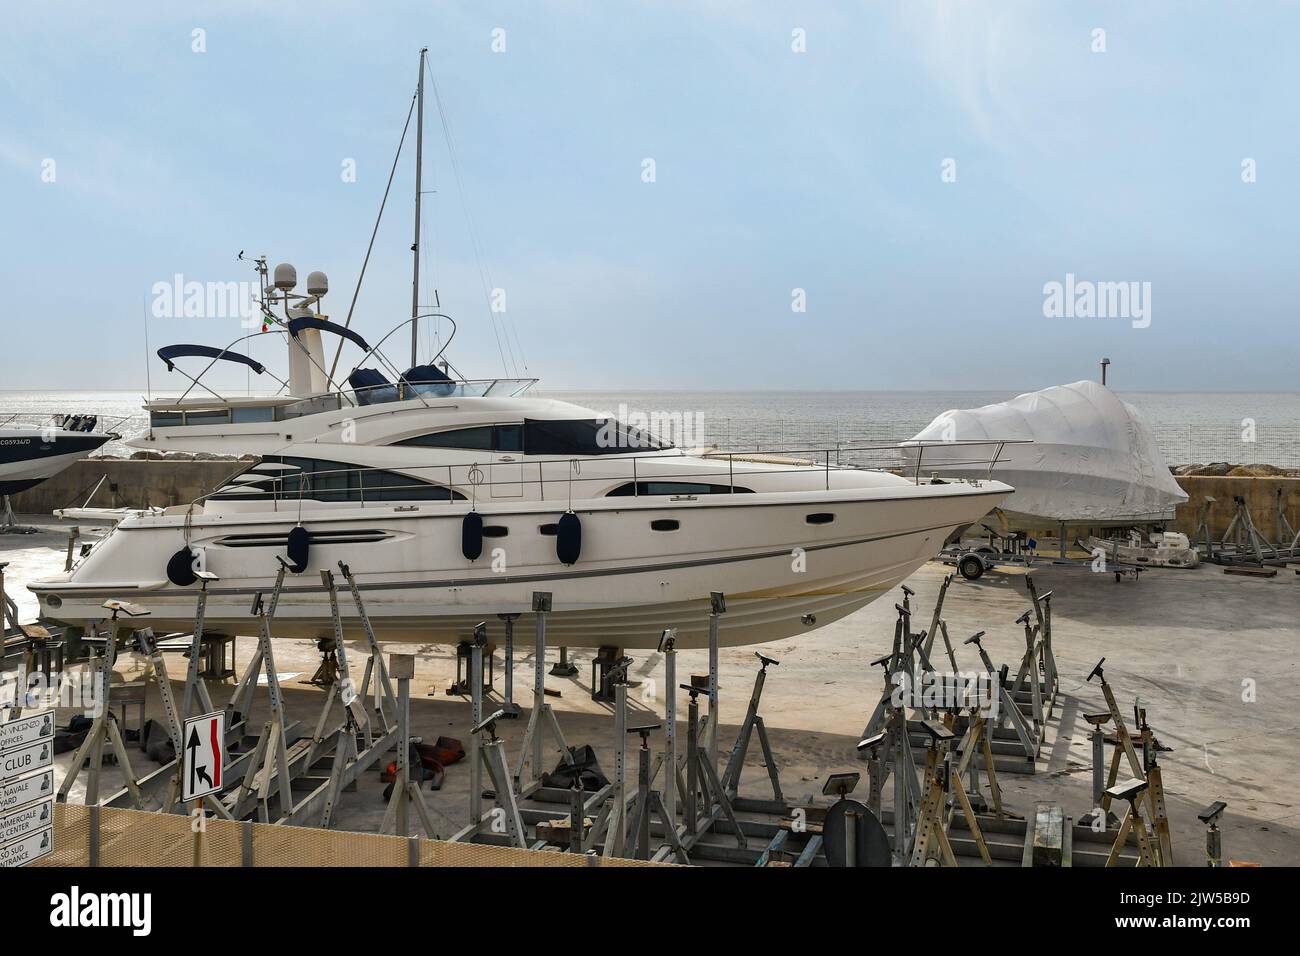 Dry boats in the shipyard of the Marina of San Vincenzo with the sea in the background, Livorno, Tuscany, Italy Stock Photo